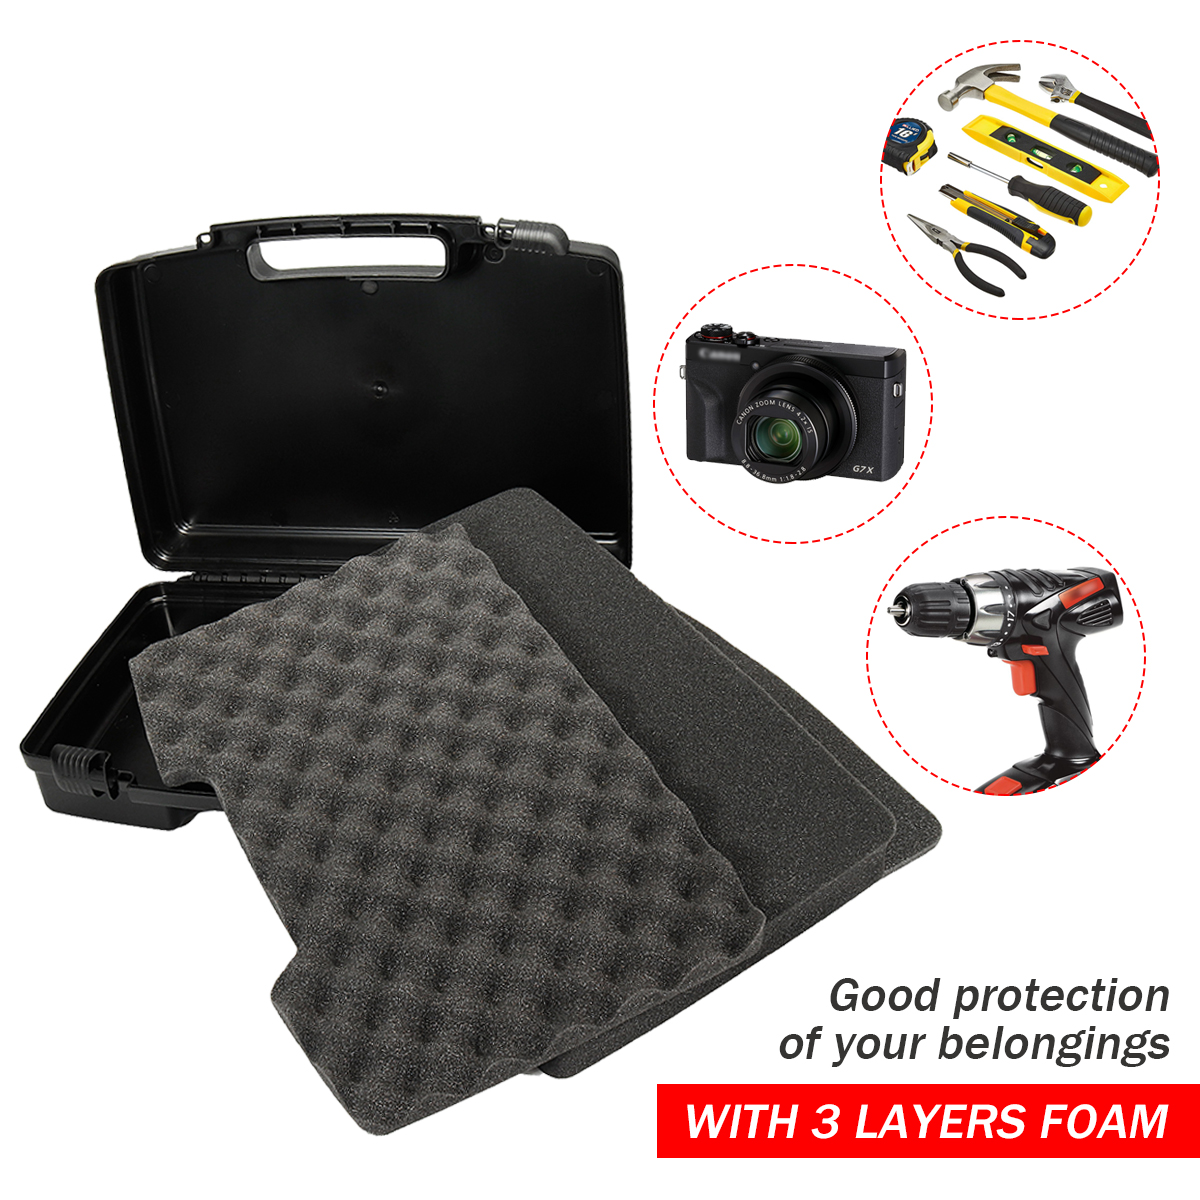 Waterproof-Hard-Carry-Tool-Case-Bag-Storage-Box-Camera-Photography-with-Foam-1791082-4